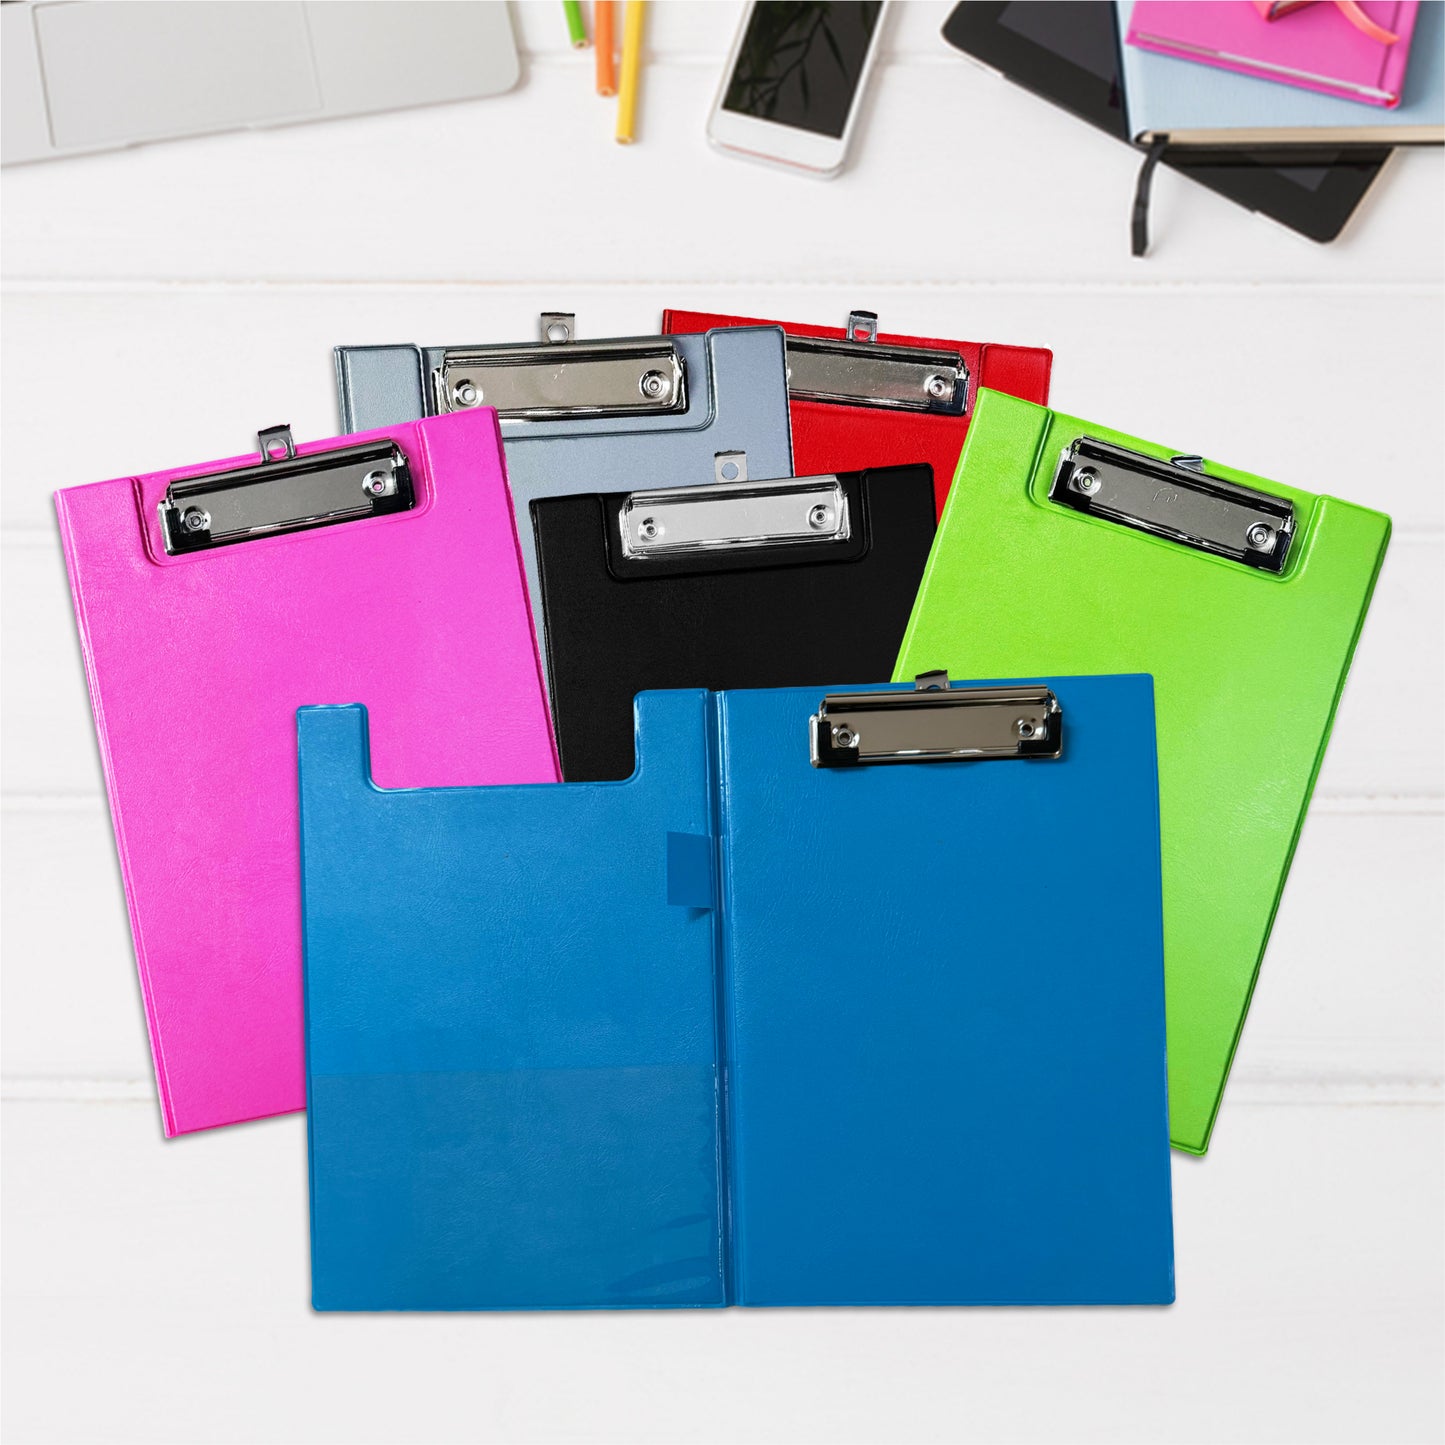 Pack of 6 A5 Neon Green Foldover Clipboards